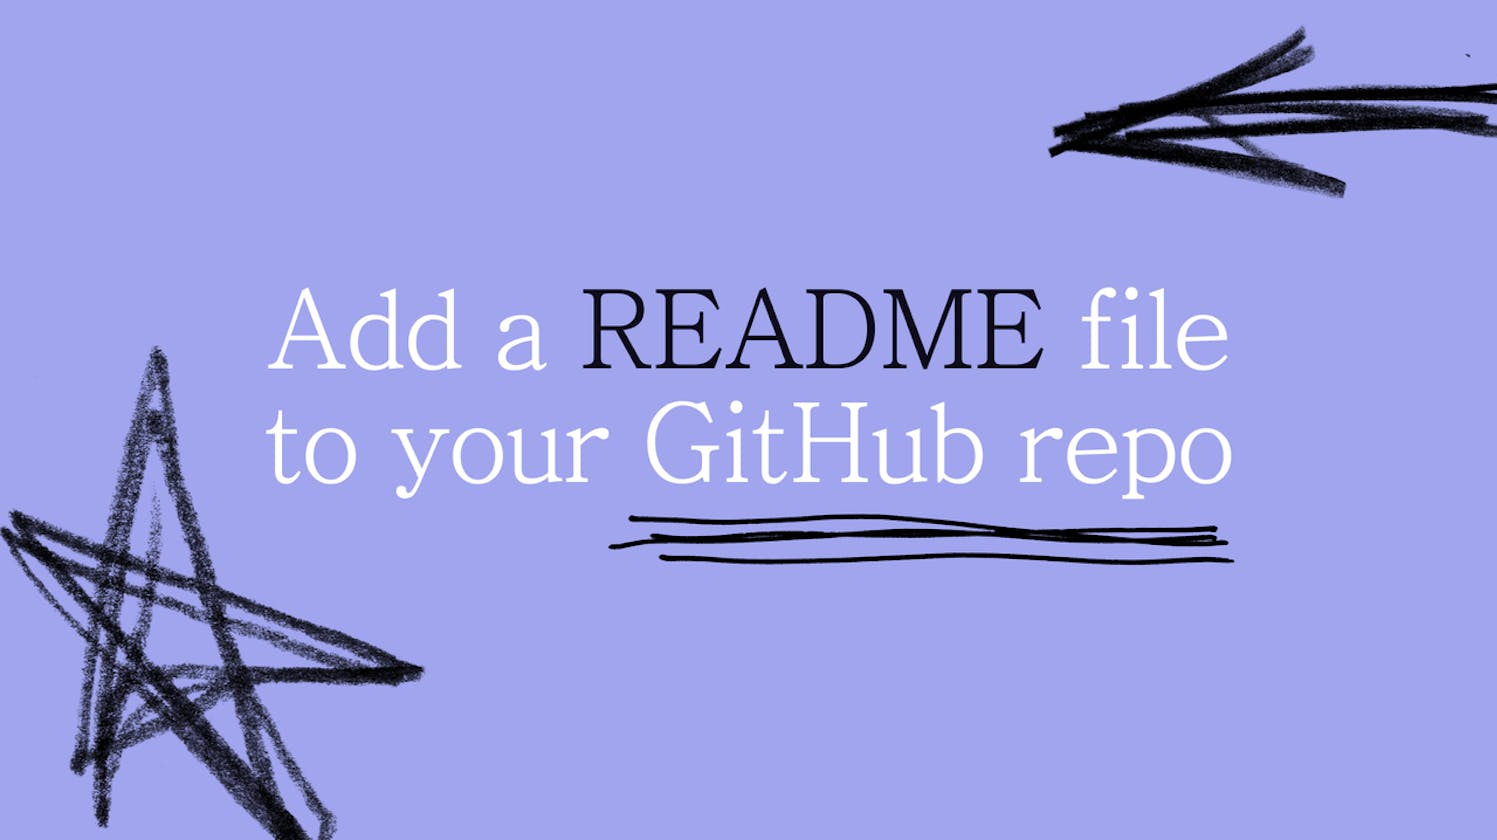 Add a README file to your GitHub repo 📖